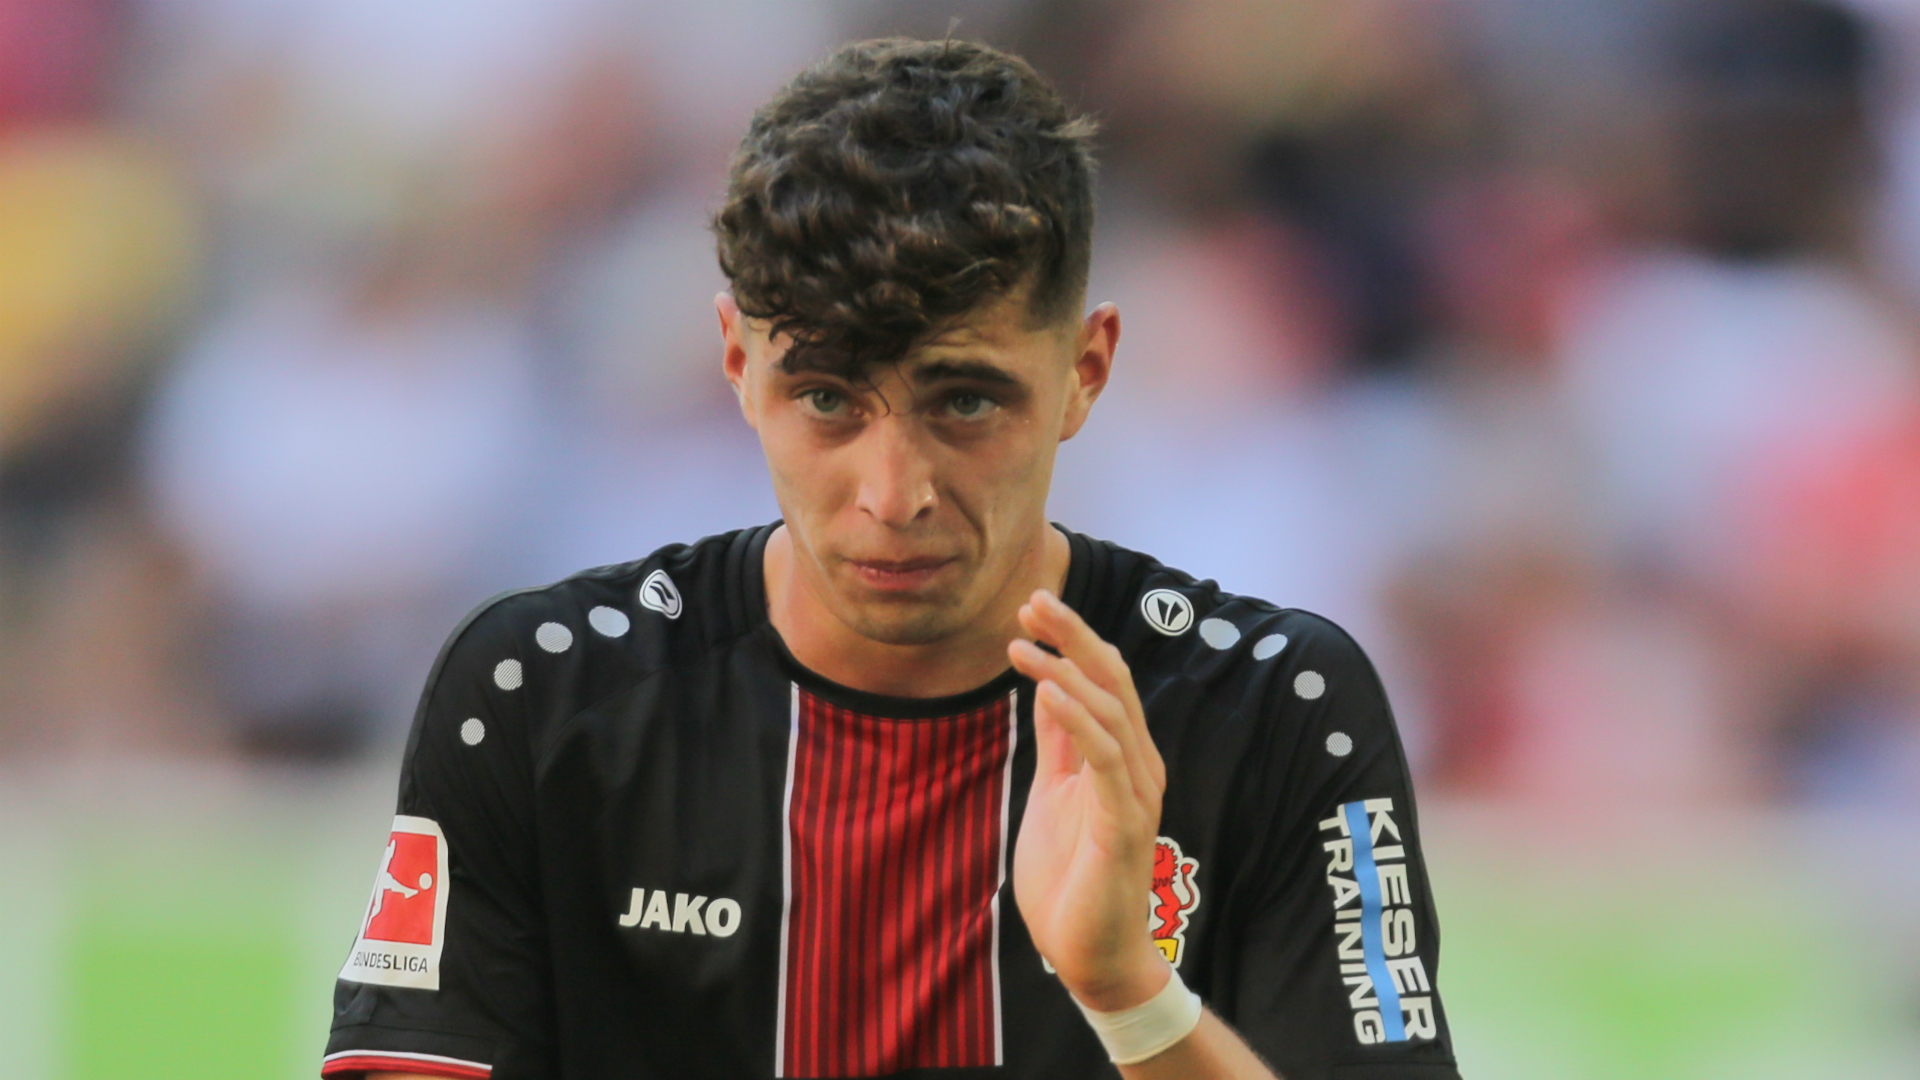 Havertz will not be risked for Bayer Leverkusen's DFB-Pokal semi-final amid injury concerns